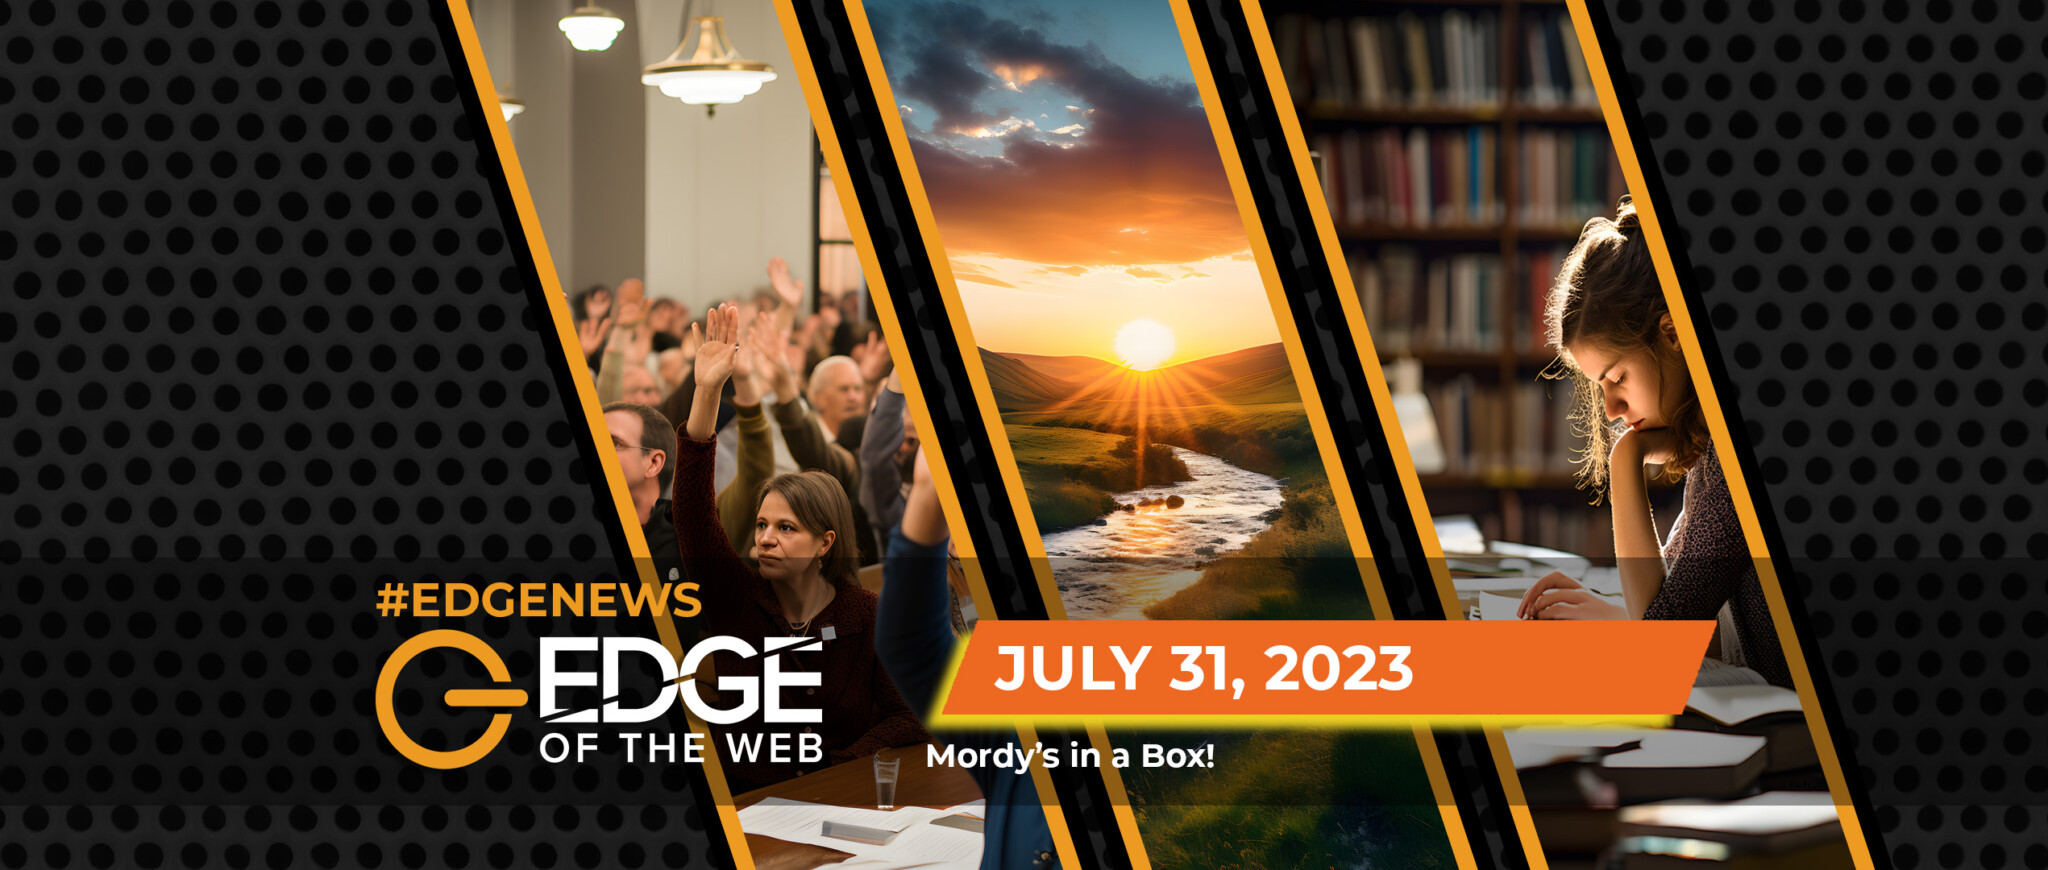 613 | News from the EDGE | Week of 7.31.2023